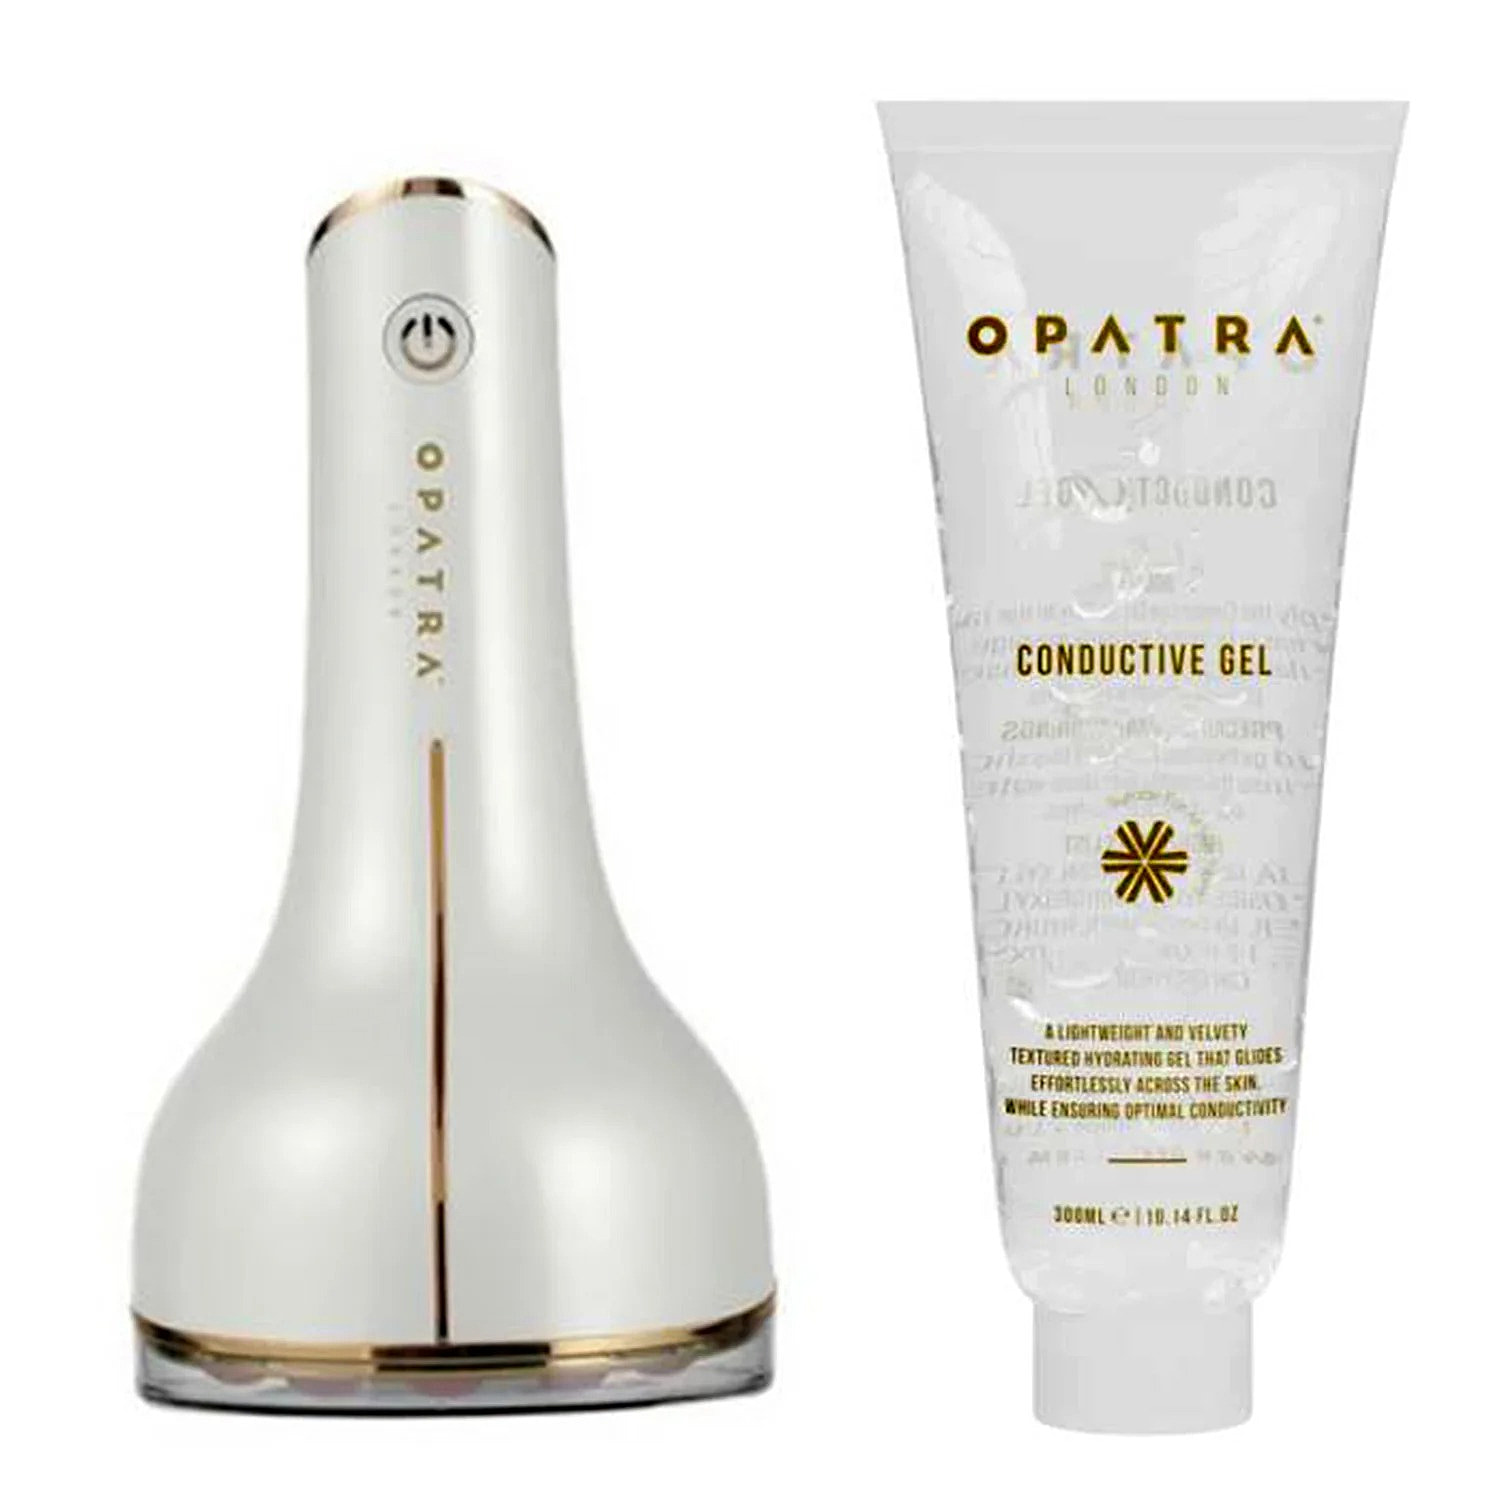 Opatra-Cavi-Shaper-With-Opatra-Conductive-Gel-Smoother,-Firmer,-and-Yo